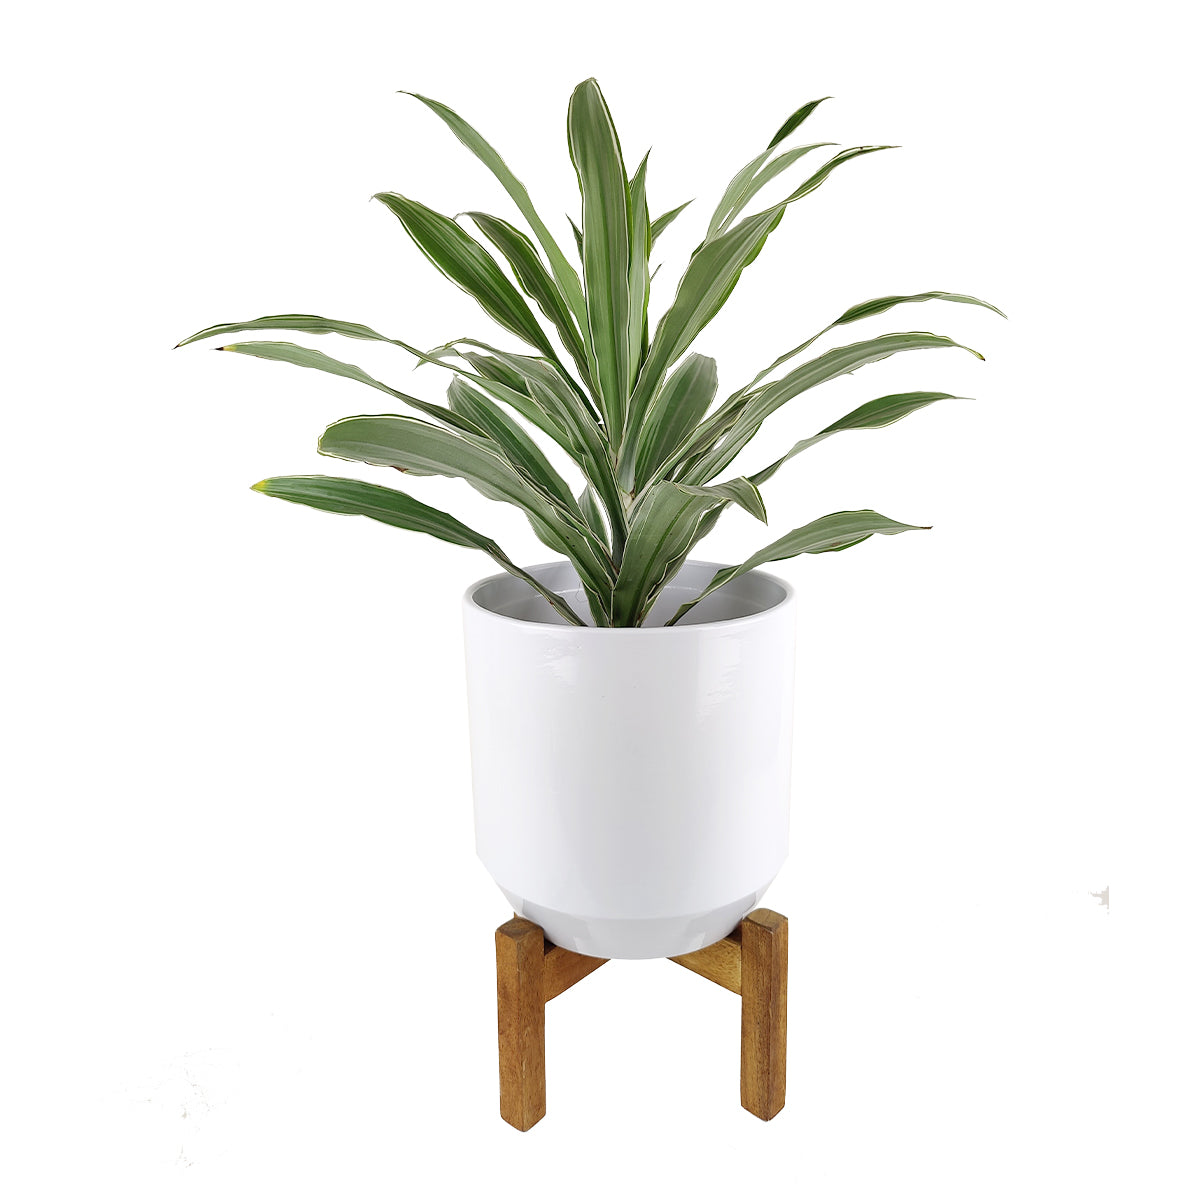 planter with stand, white planter with stand, plant pot with stand, pot with stand, large planter with stand, ceramic planter with stand, indoor plant pot with stand, 10 inch planter with stand, large pot with stand, 10 inch pot with stand, Pot for Indoor Houseplant